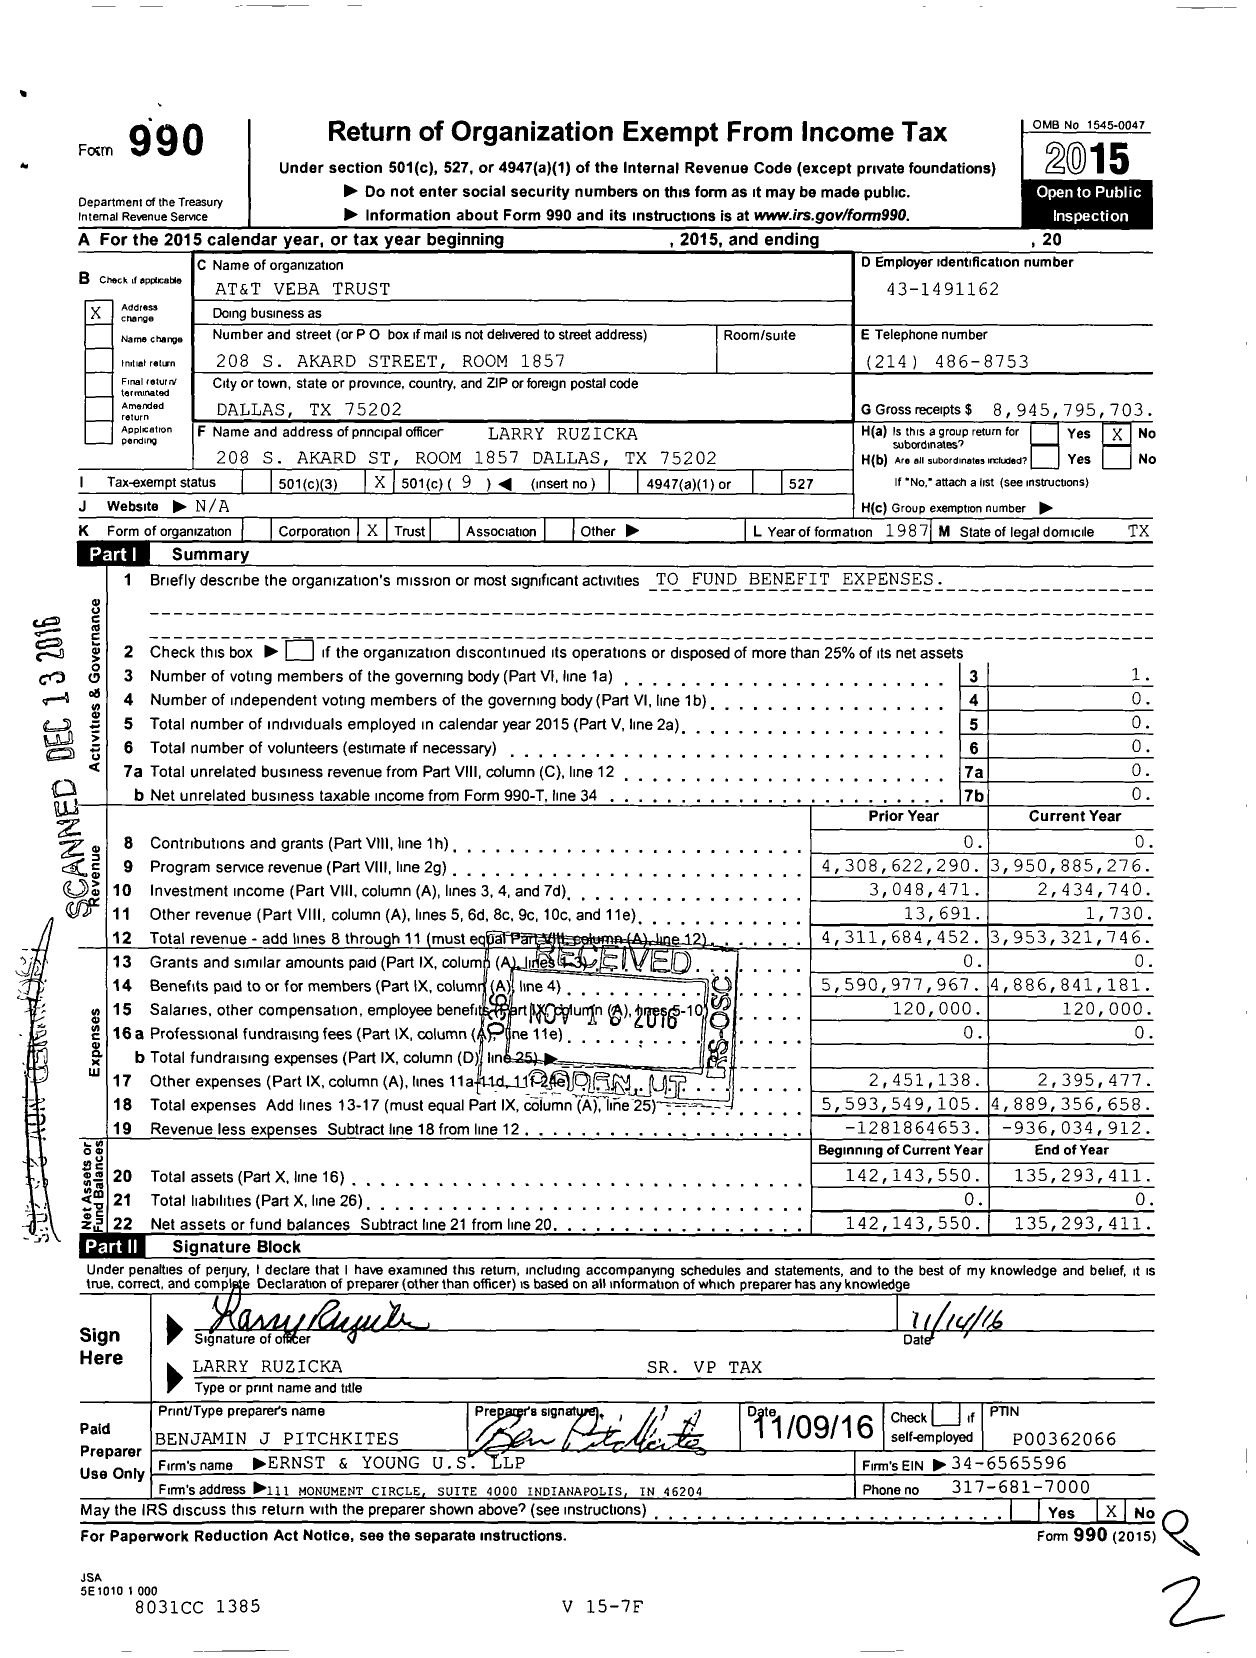 Image of first page of 2015 Form 990O for At&t Veba Trust